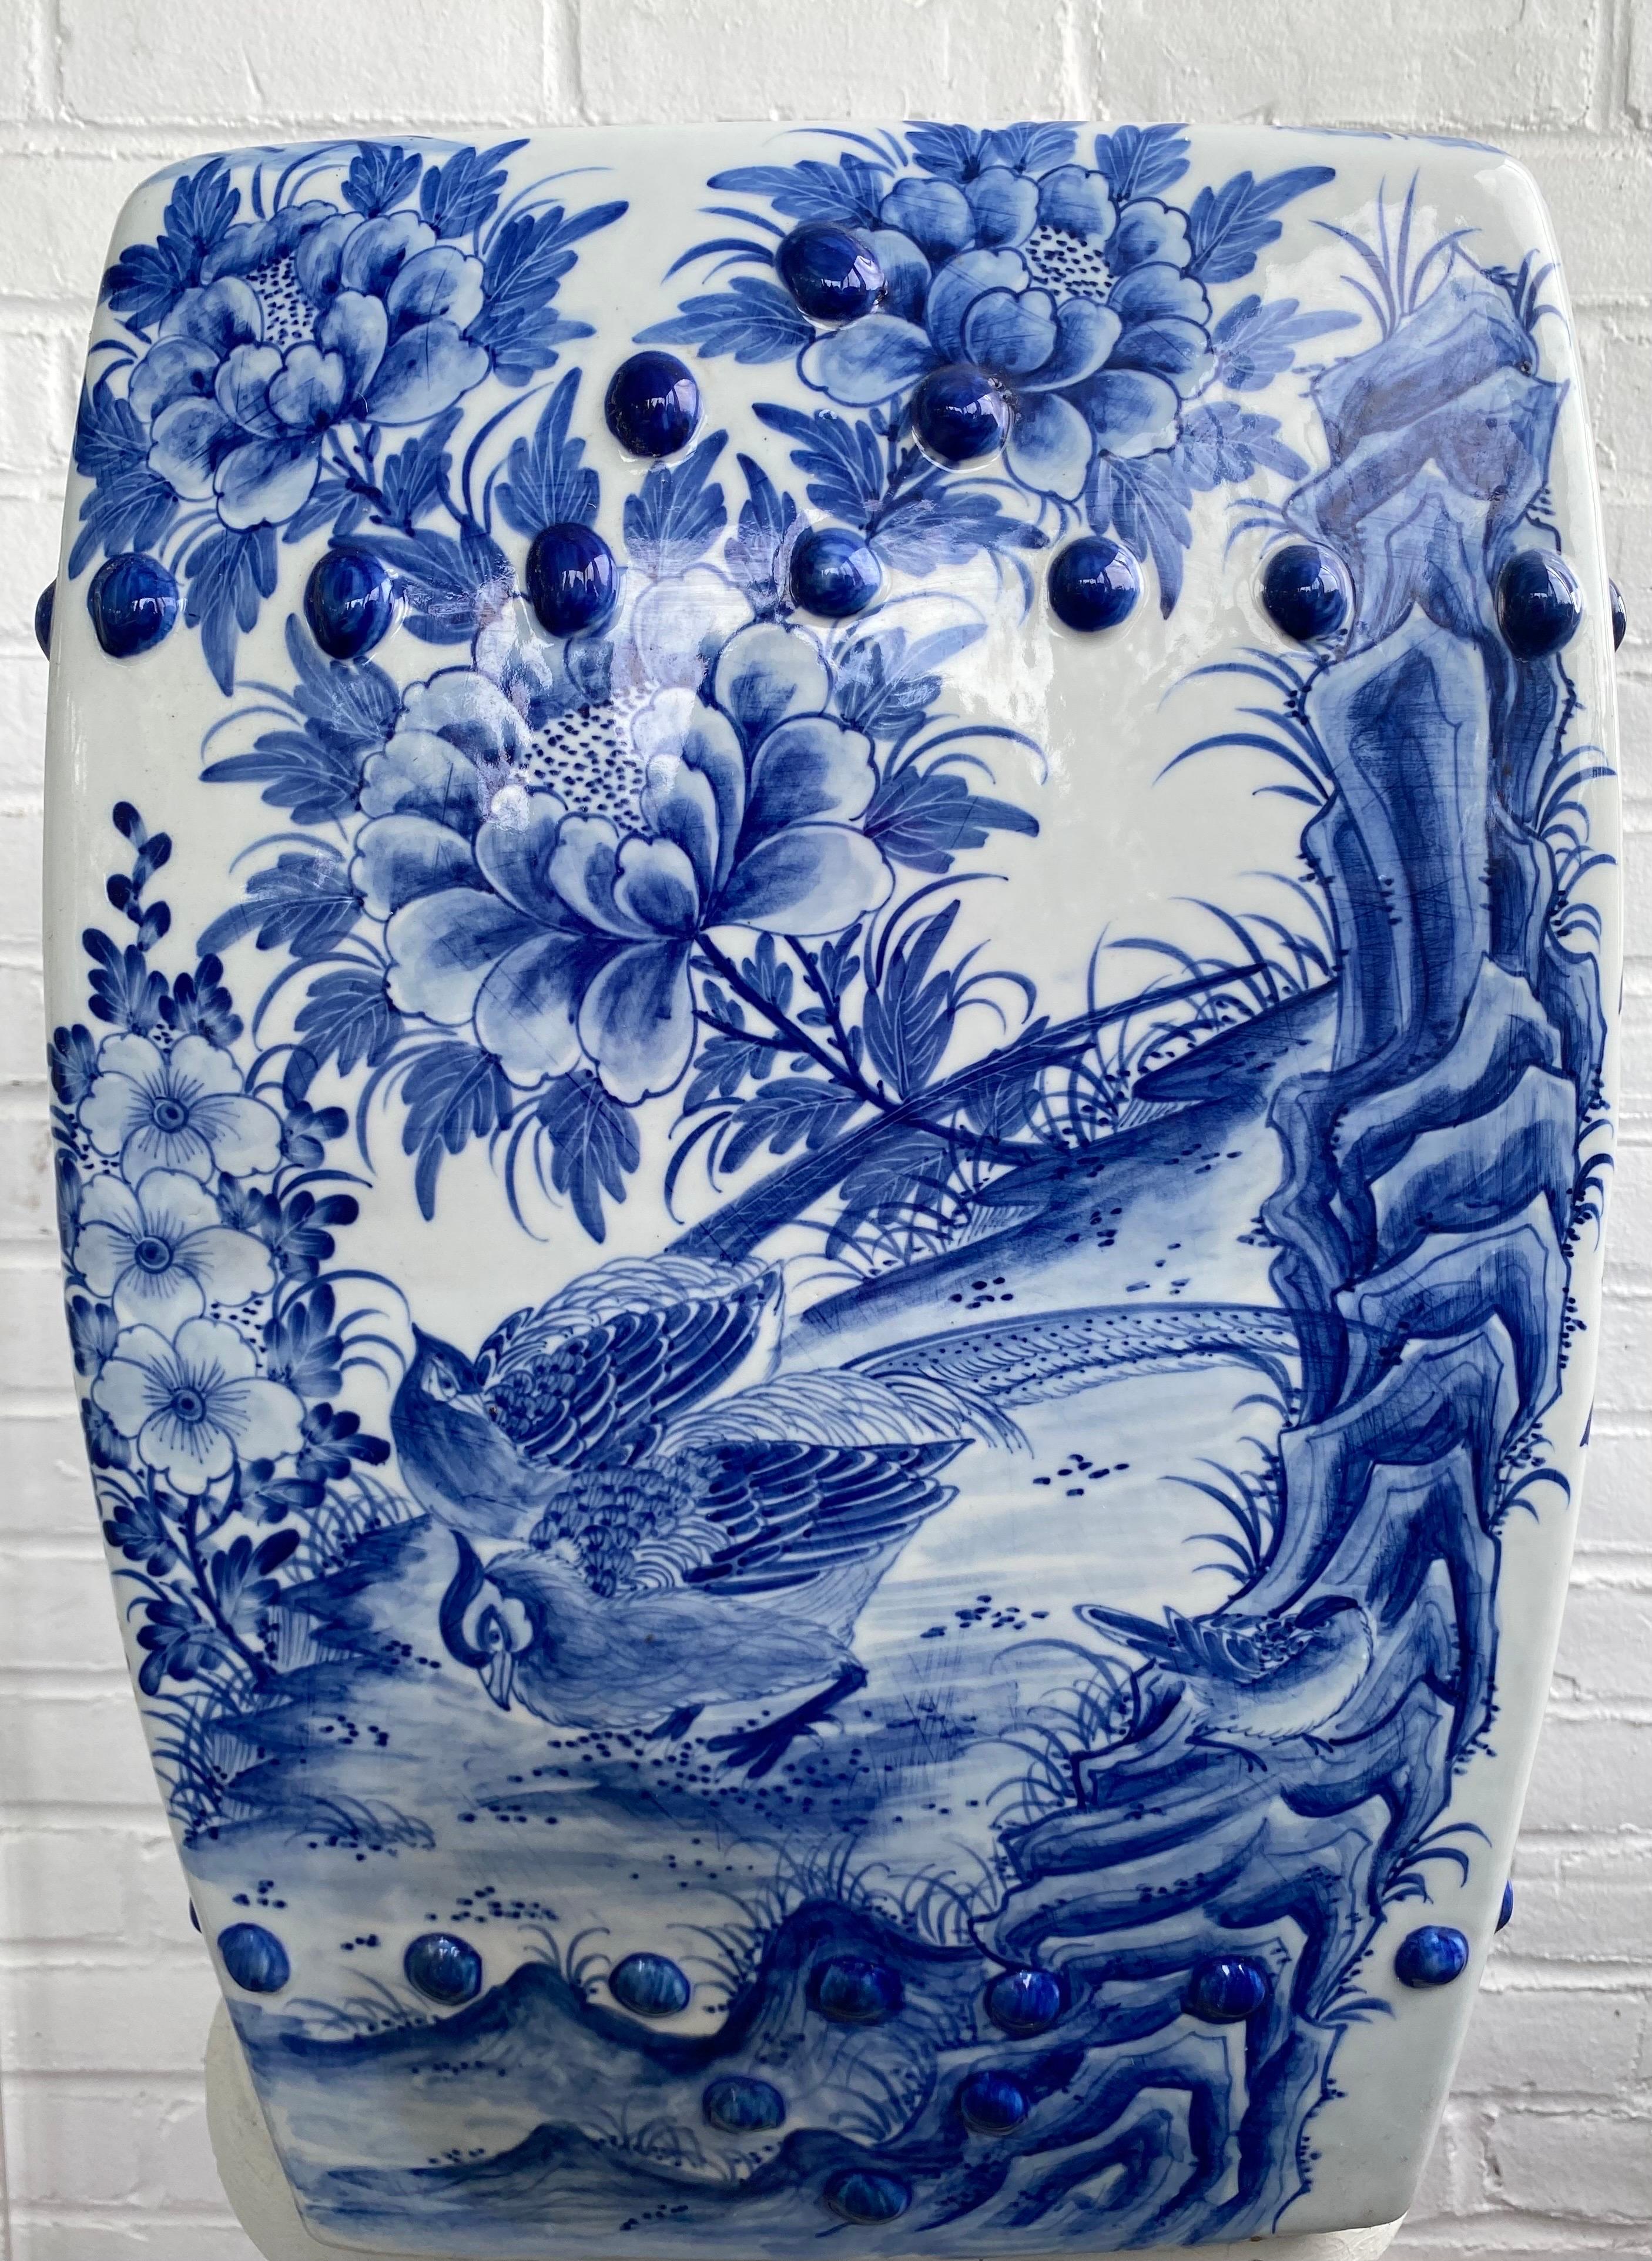 Chinese Blue and White Garden Stool/Seat In Good Condition For Sale In East Hampton, NY